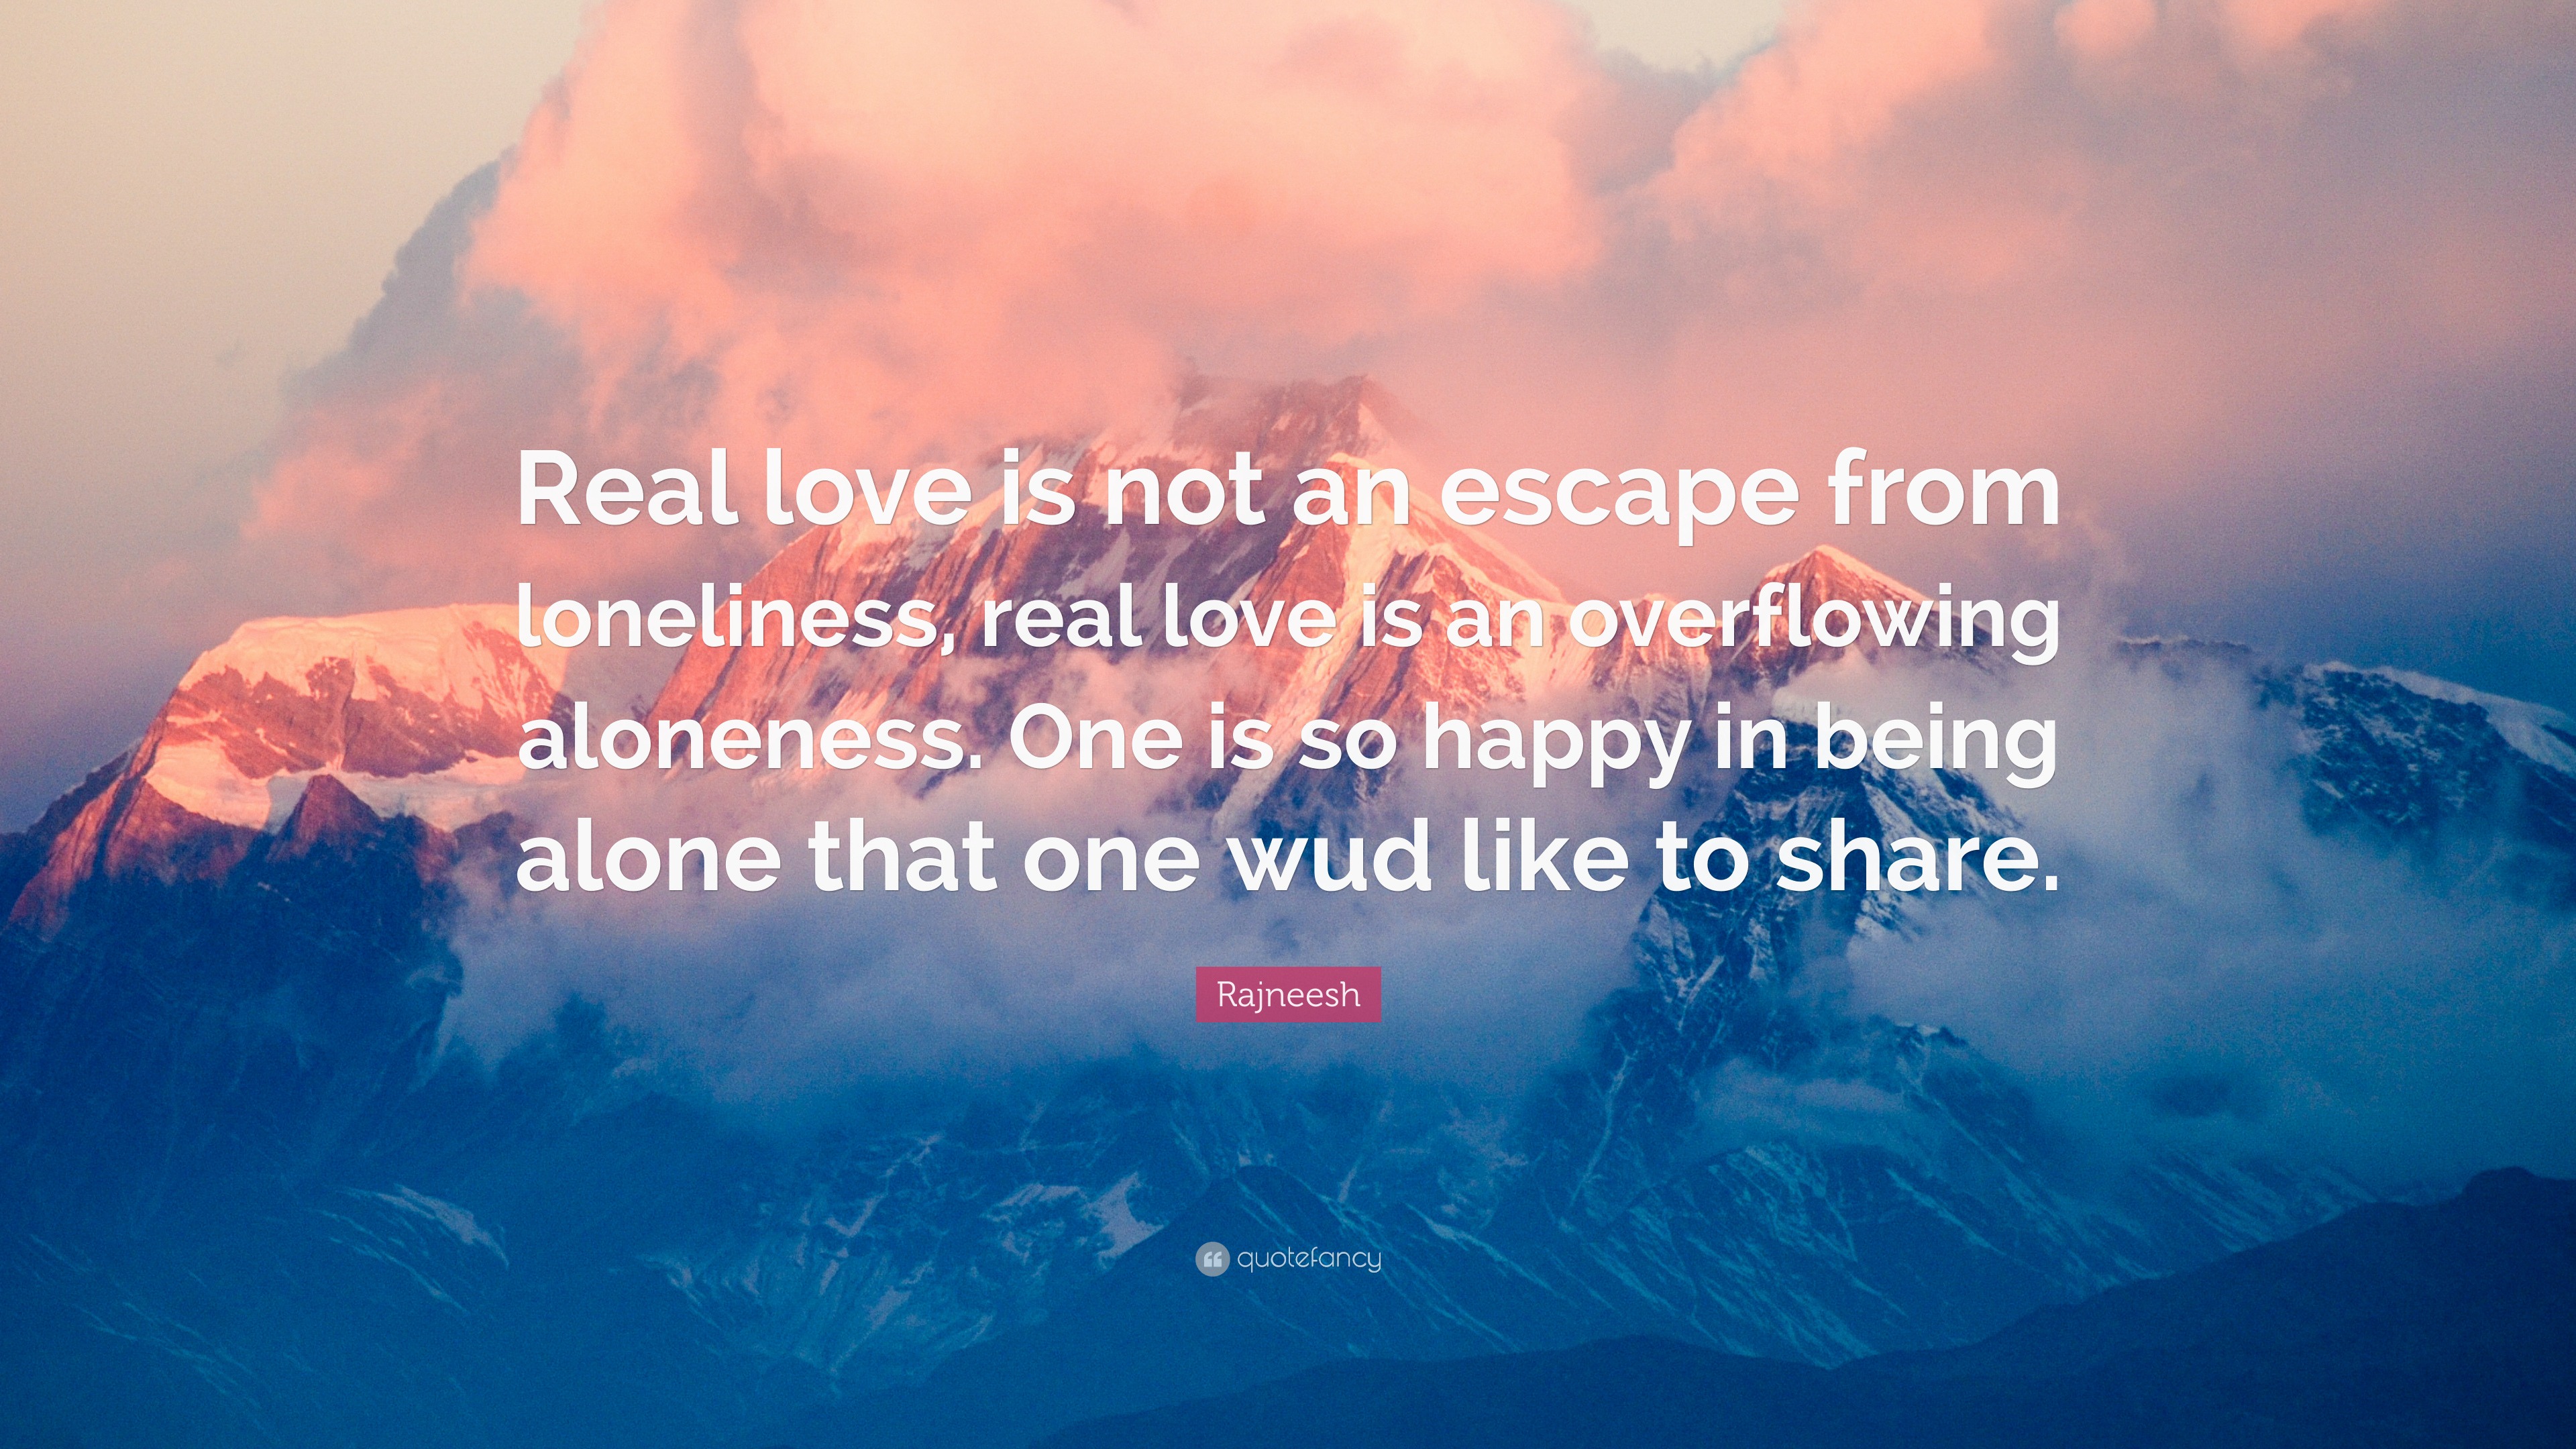 Rajneesh Quote: “Real love is not an escape from loneliness, real love is  an overflowing aloneness. One is so happy in being alone that o”